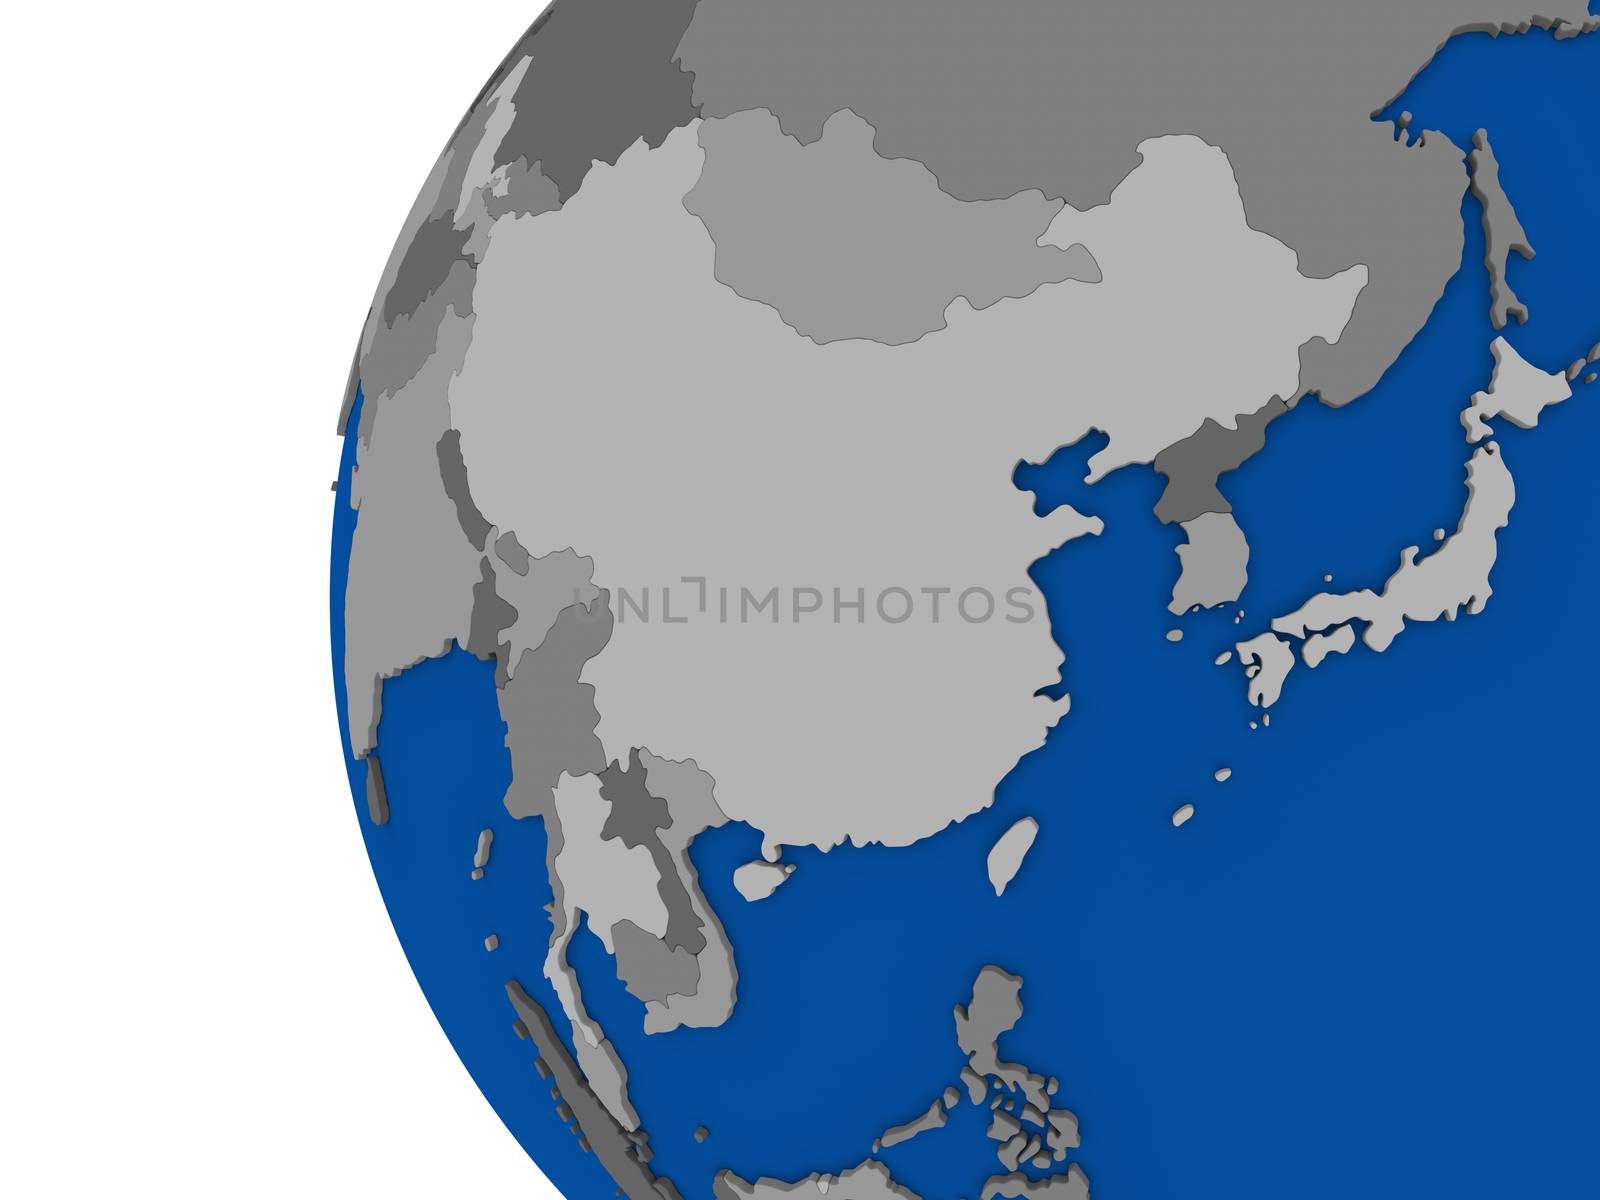 Illustration of east Asia region continent on political globe with white background